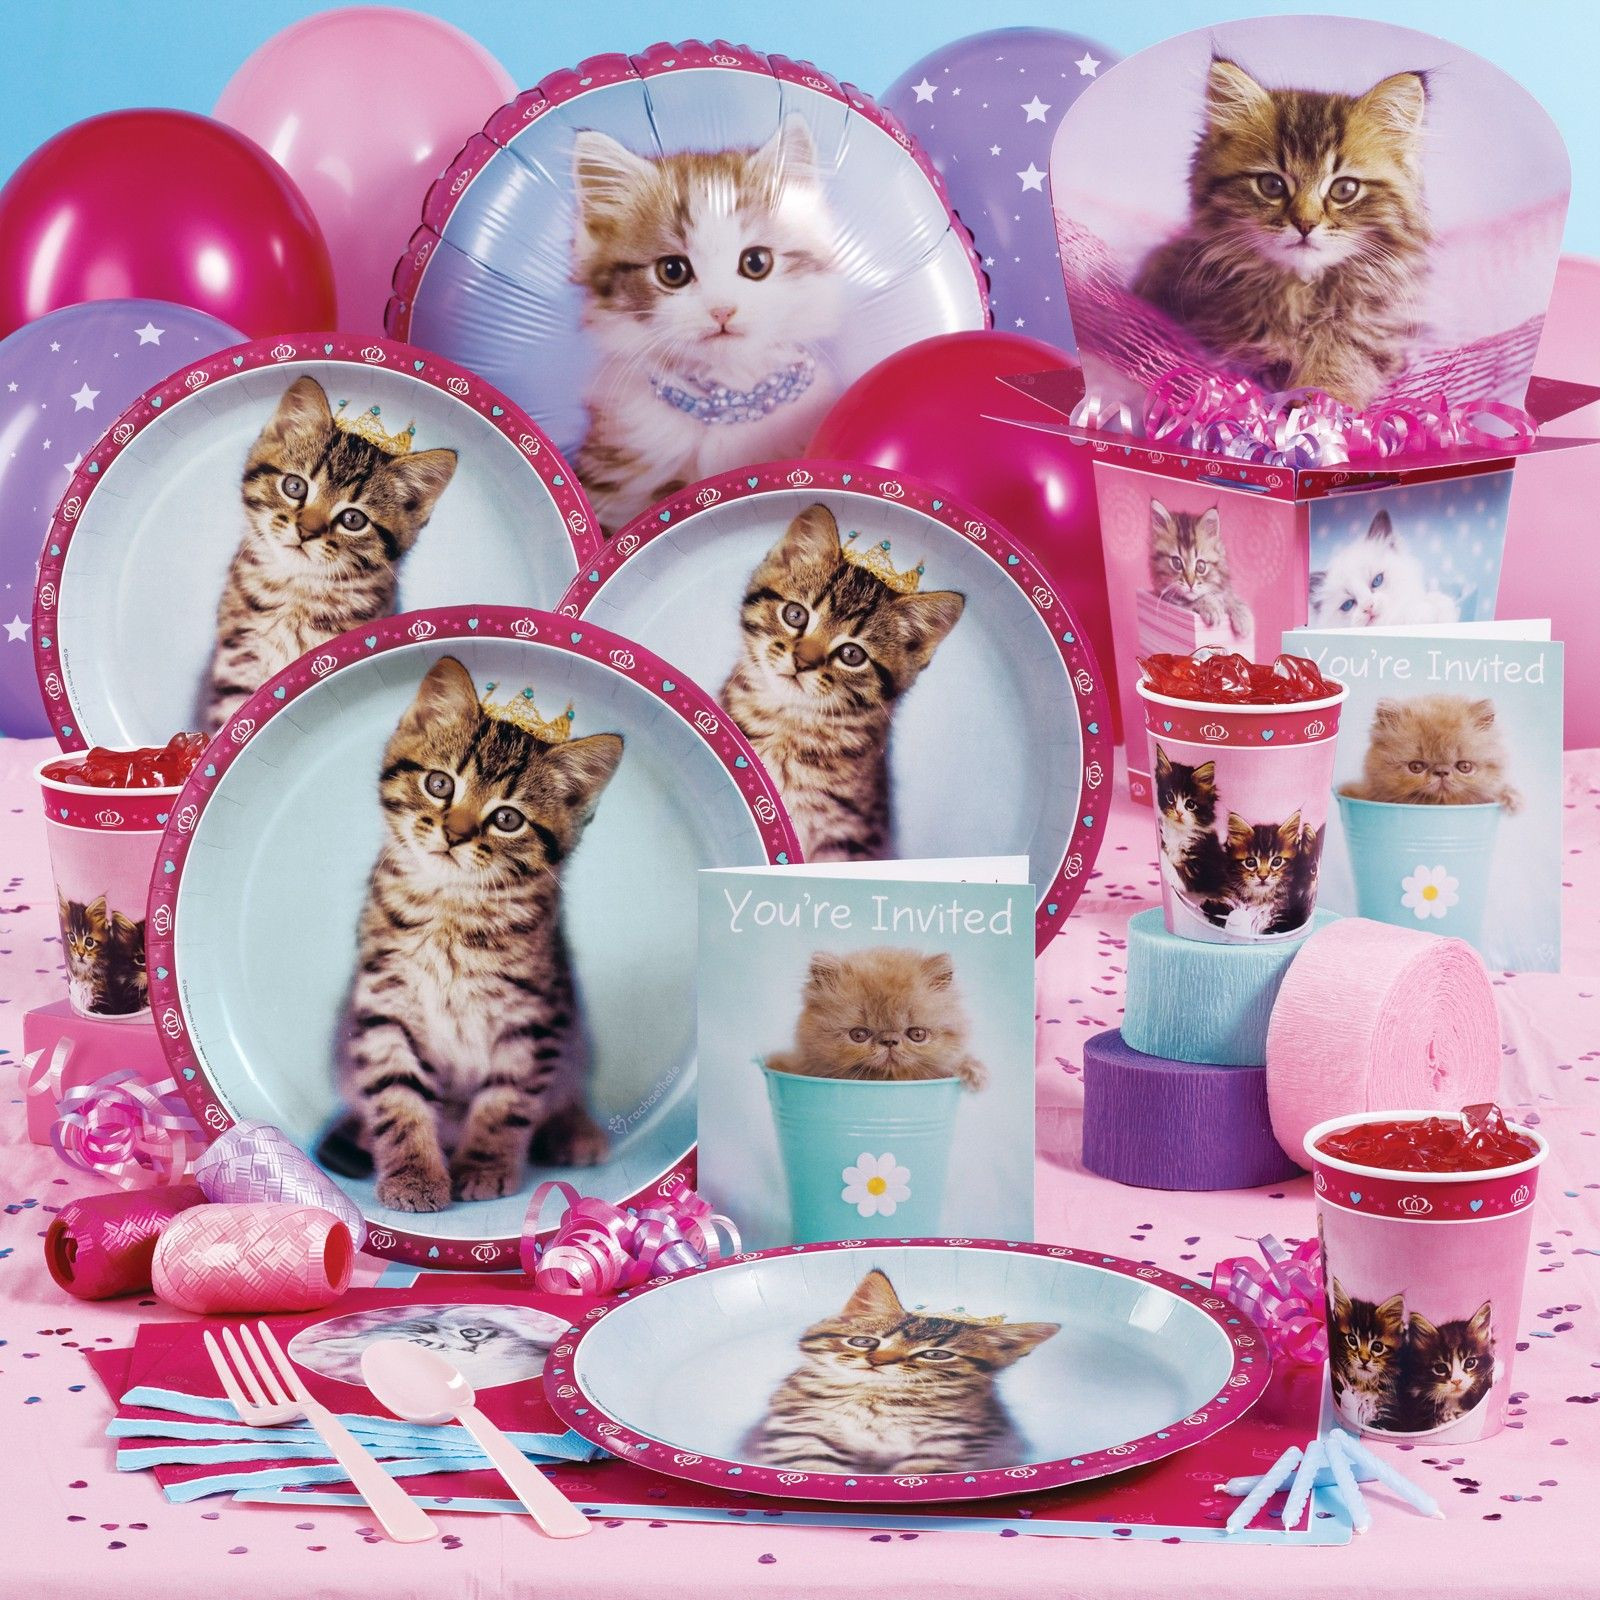 Cat Birthday Decorations
 Princess kitty party supplies from Birthday Express